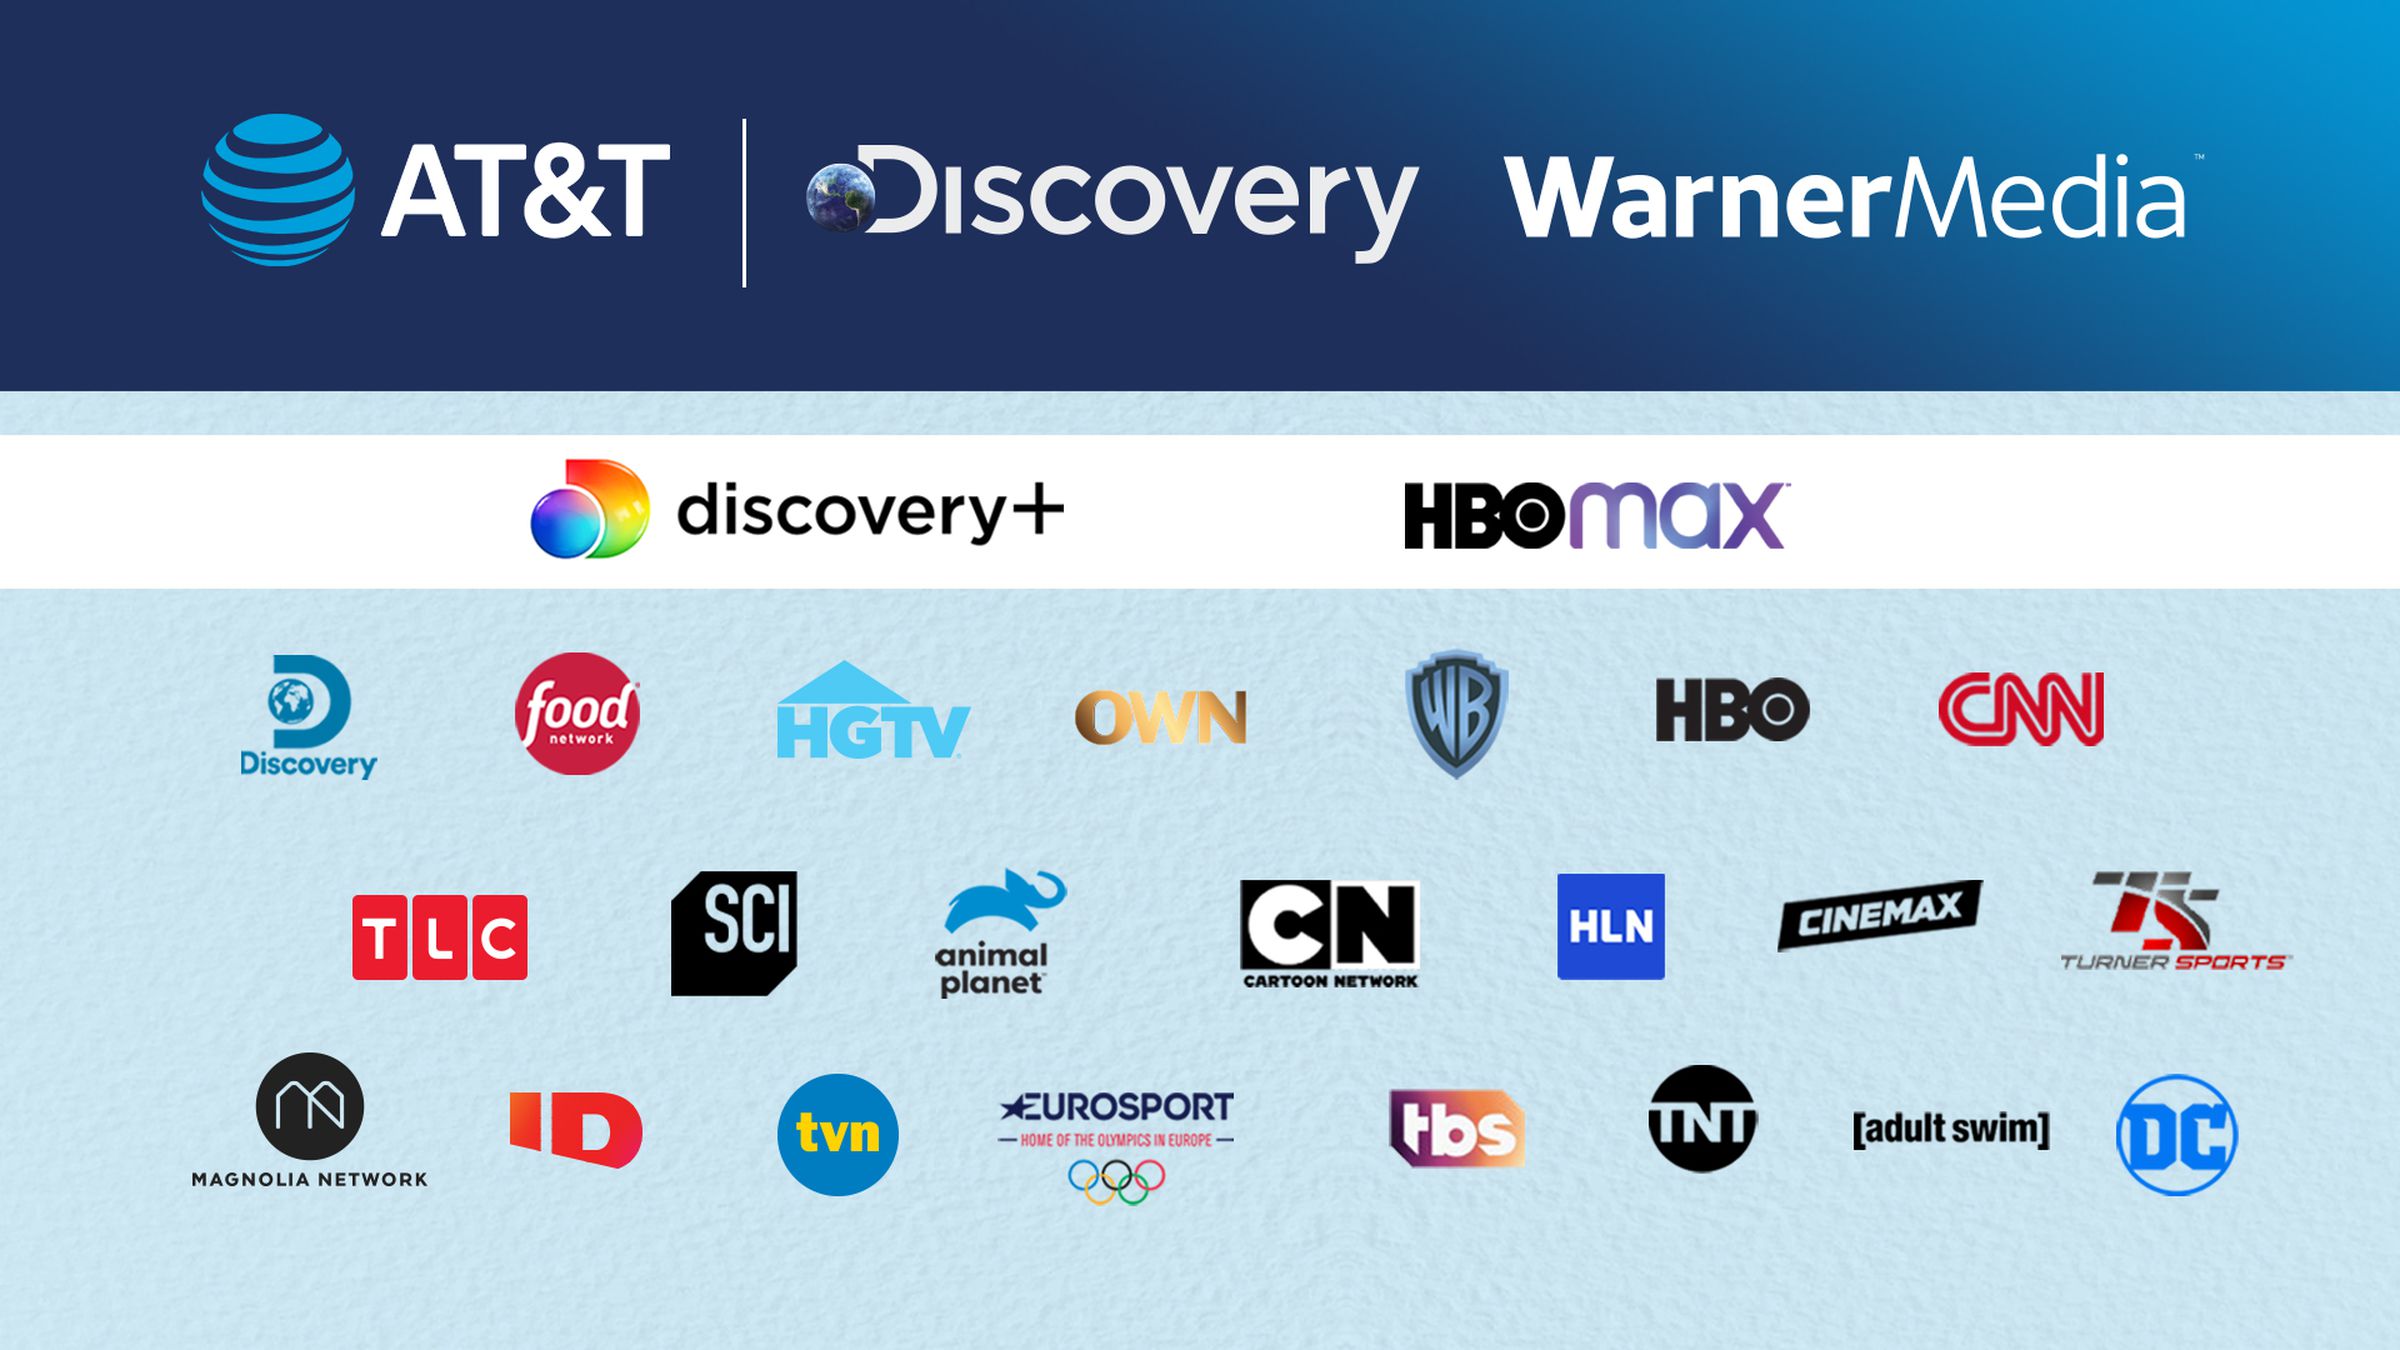 The new unnamed company built from WarnerMedia and AT&T will have a sizable stable of brands and media properties. 